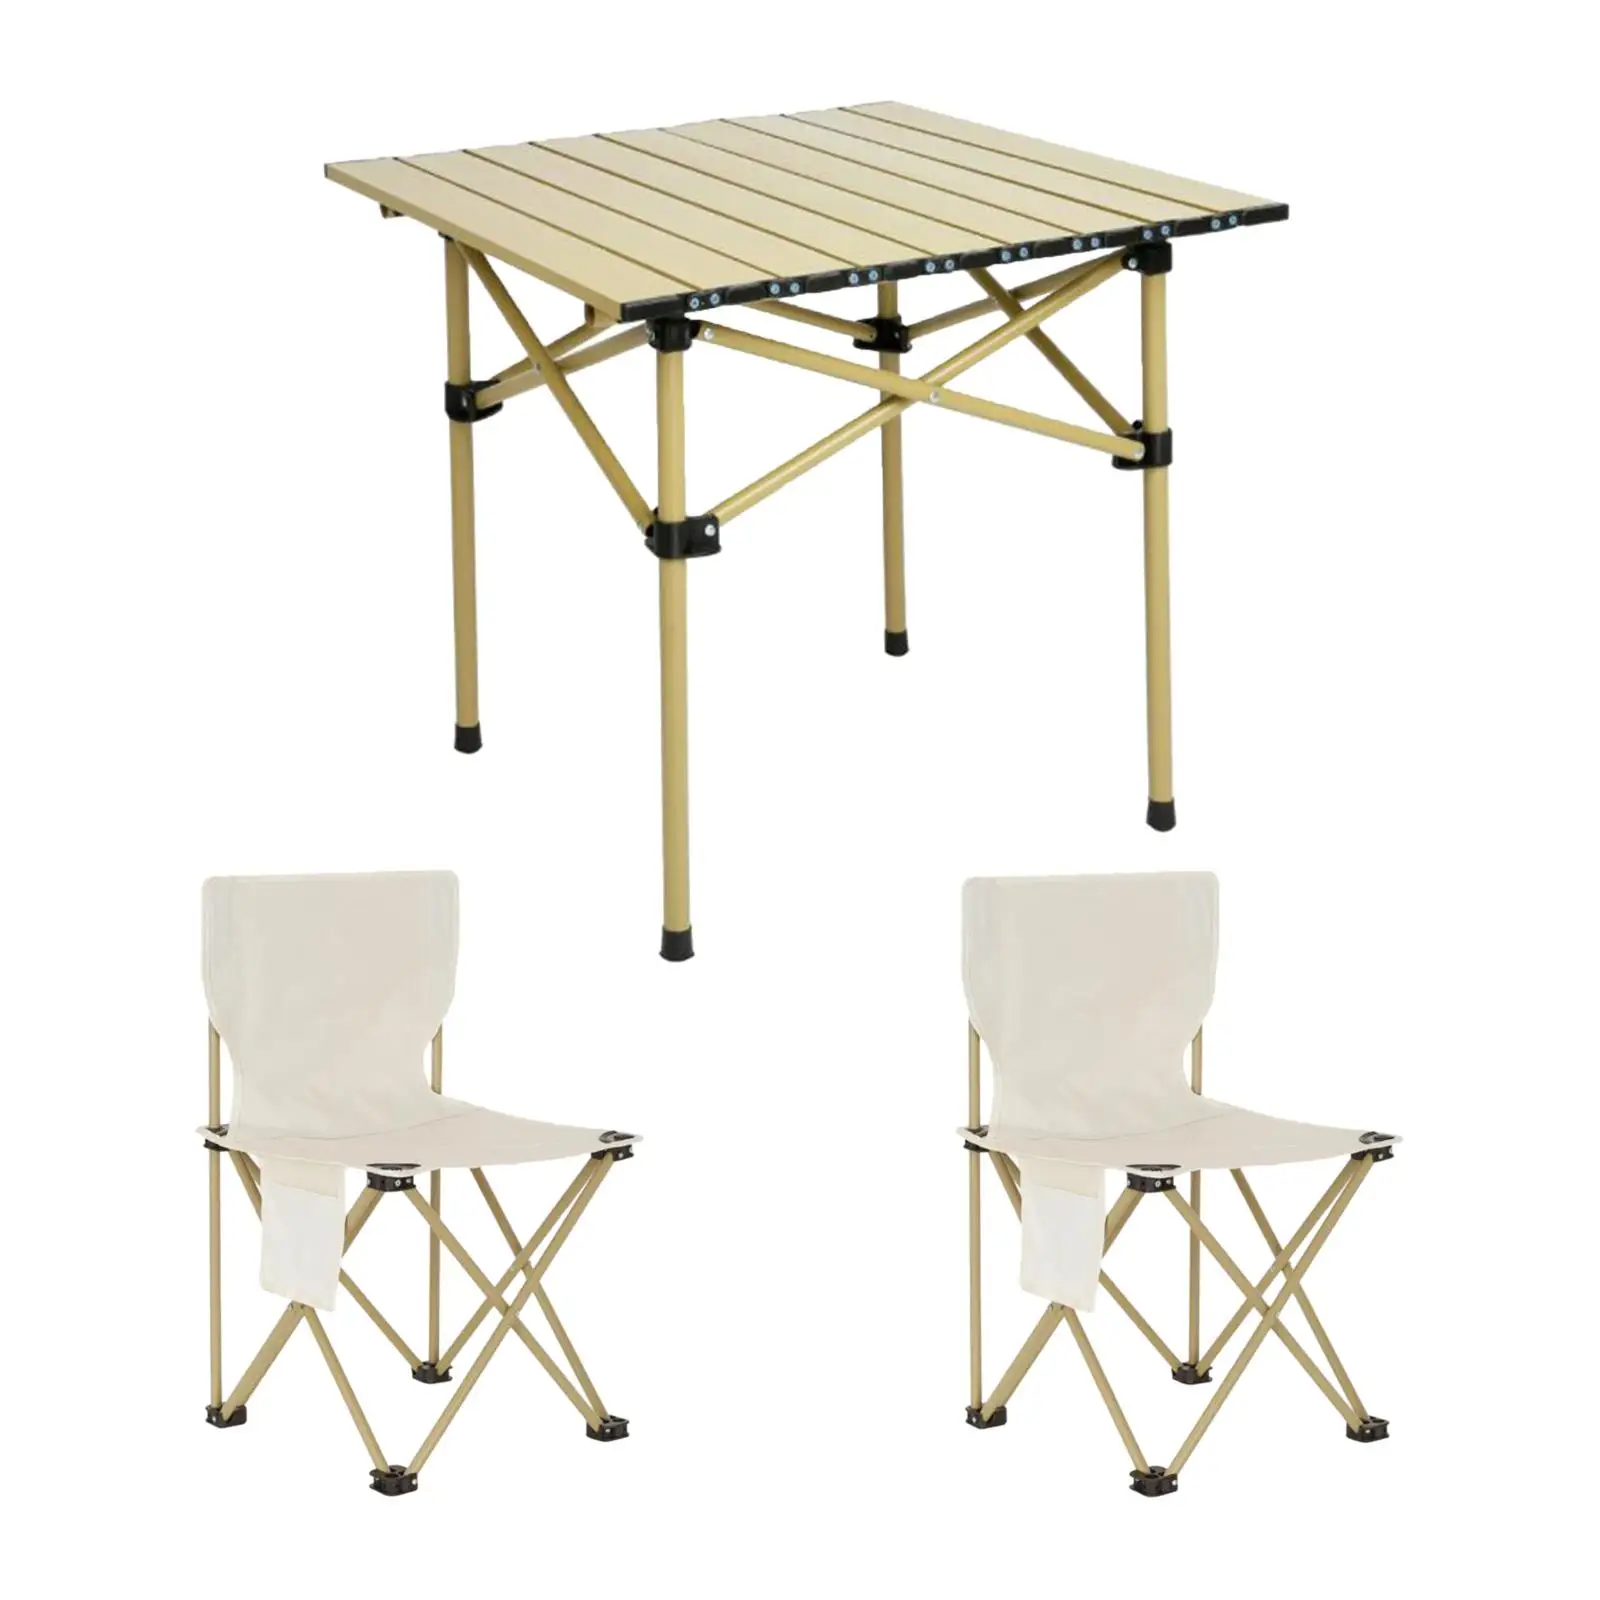 Camping Folding Table Chairs Set with 2 Stools Camp Table Coffee Table Steel Table Foldable Picnic Table for BBQ Backyard Garden